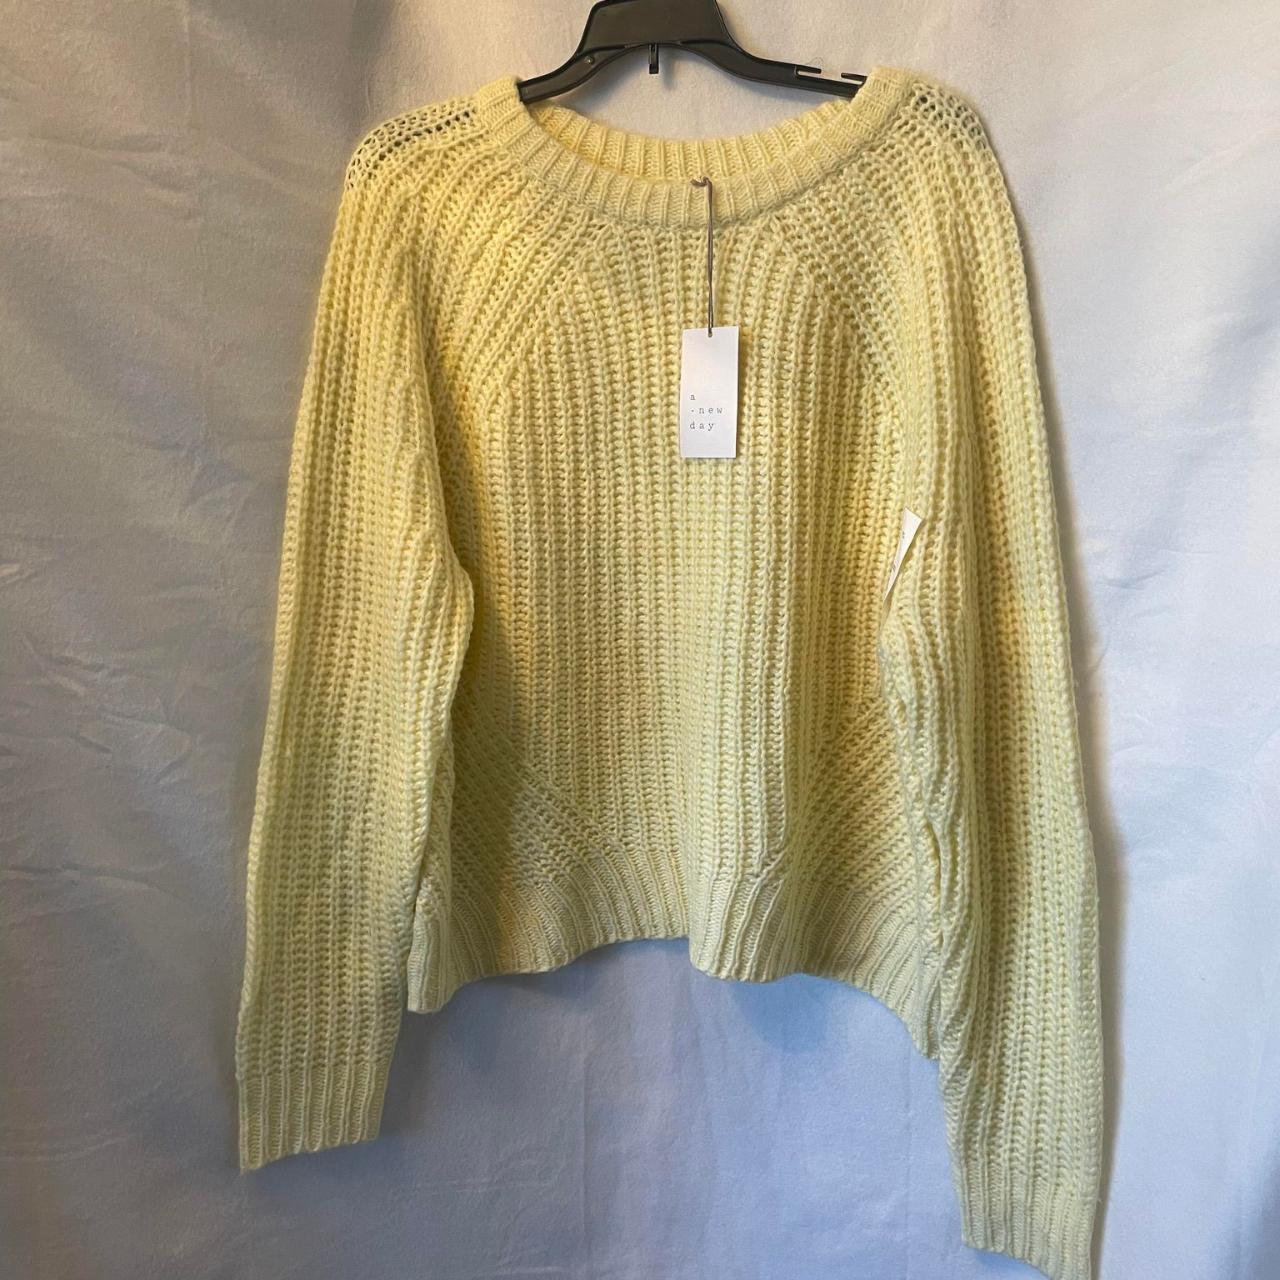 NWT A New Day Yellow Sweater Size 2X - Depop